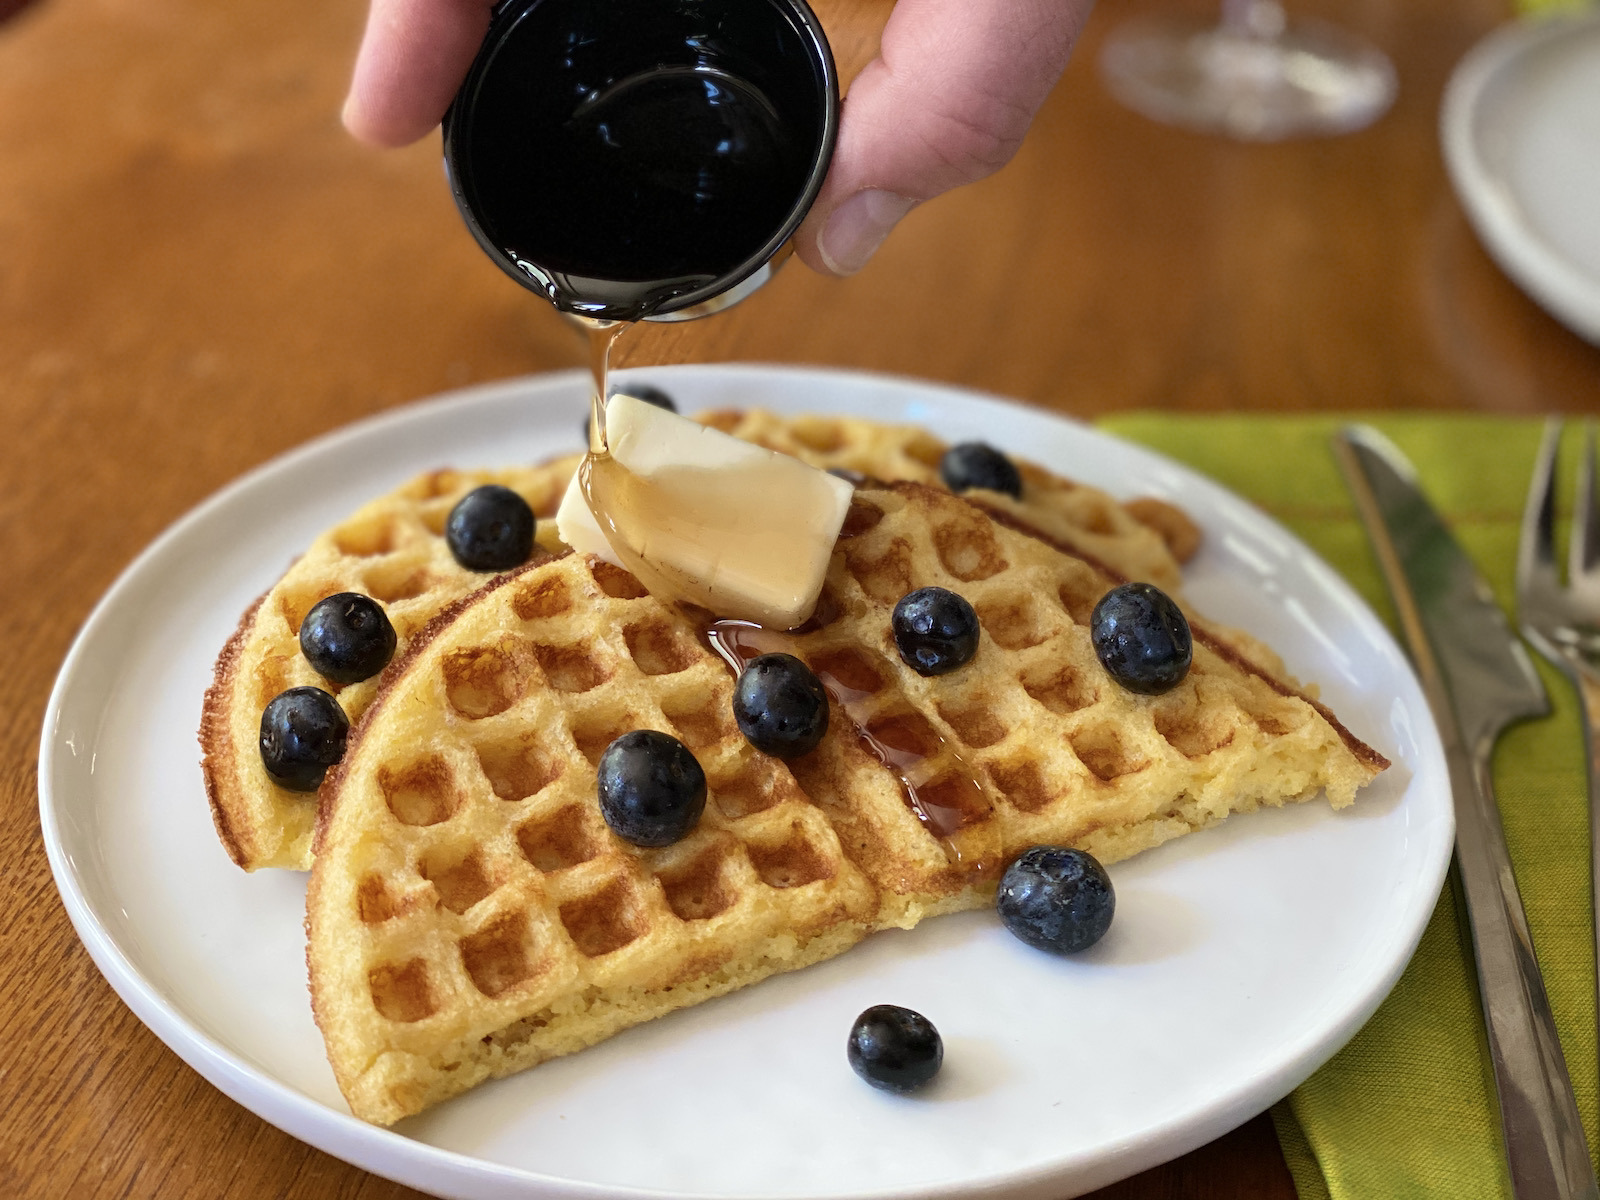 Cornmeal waffle with butter, blueberries and maple syrup